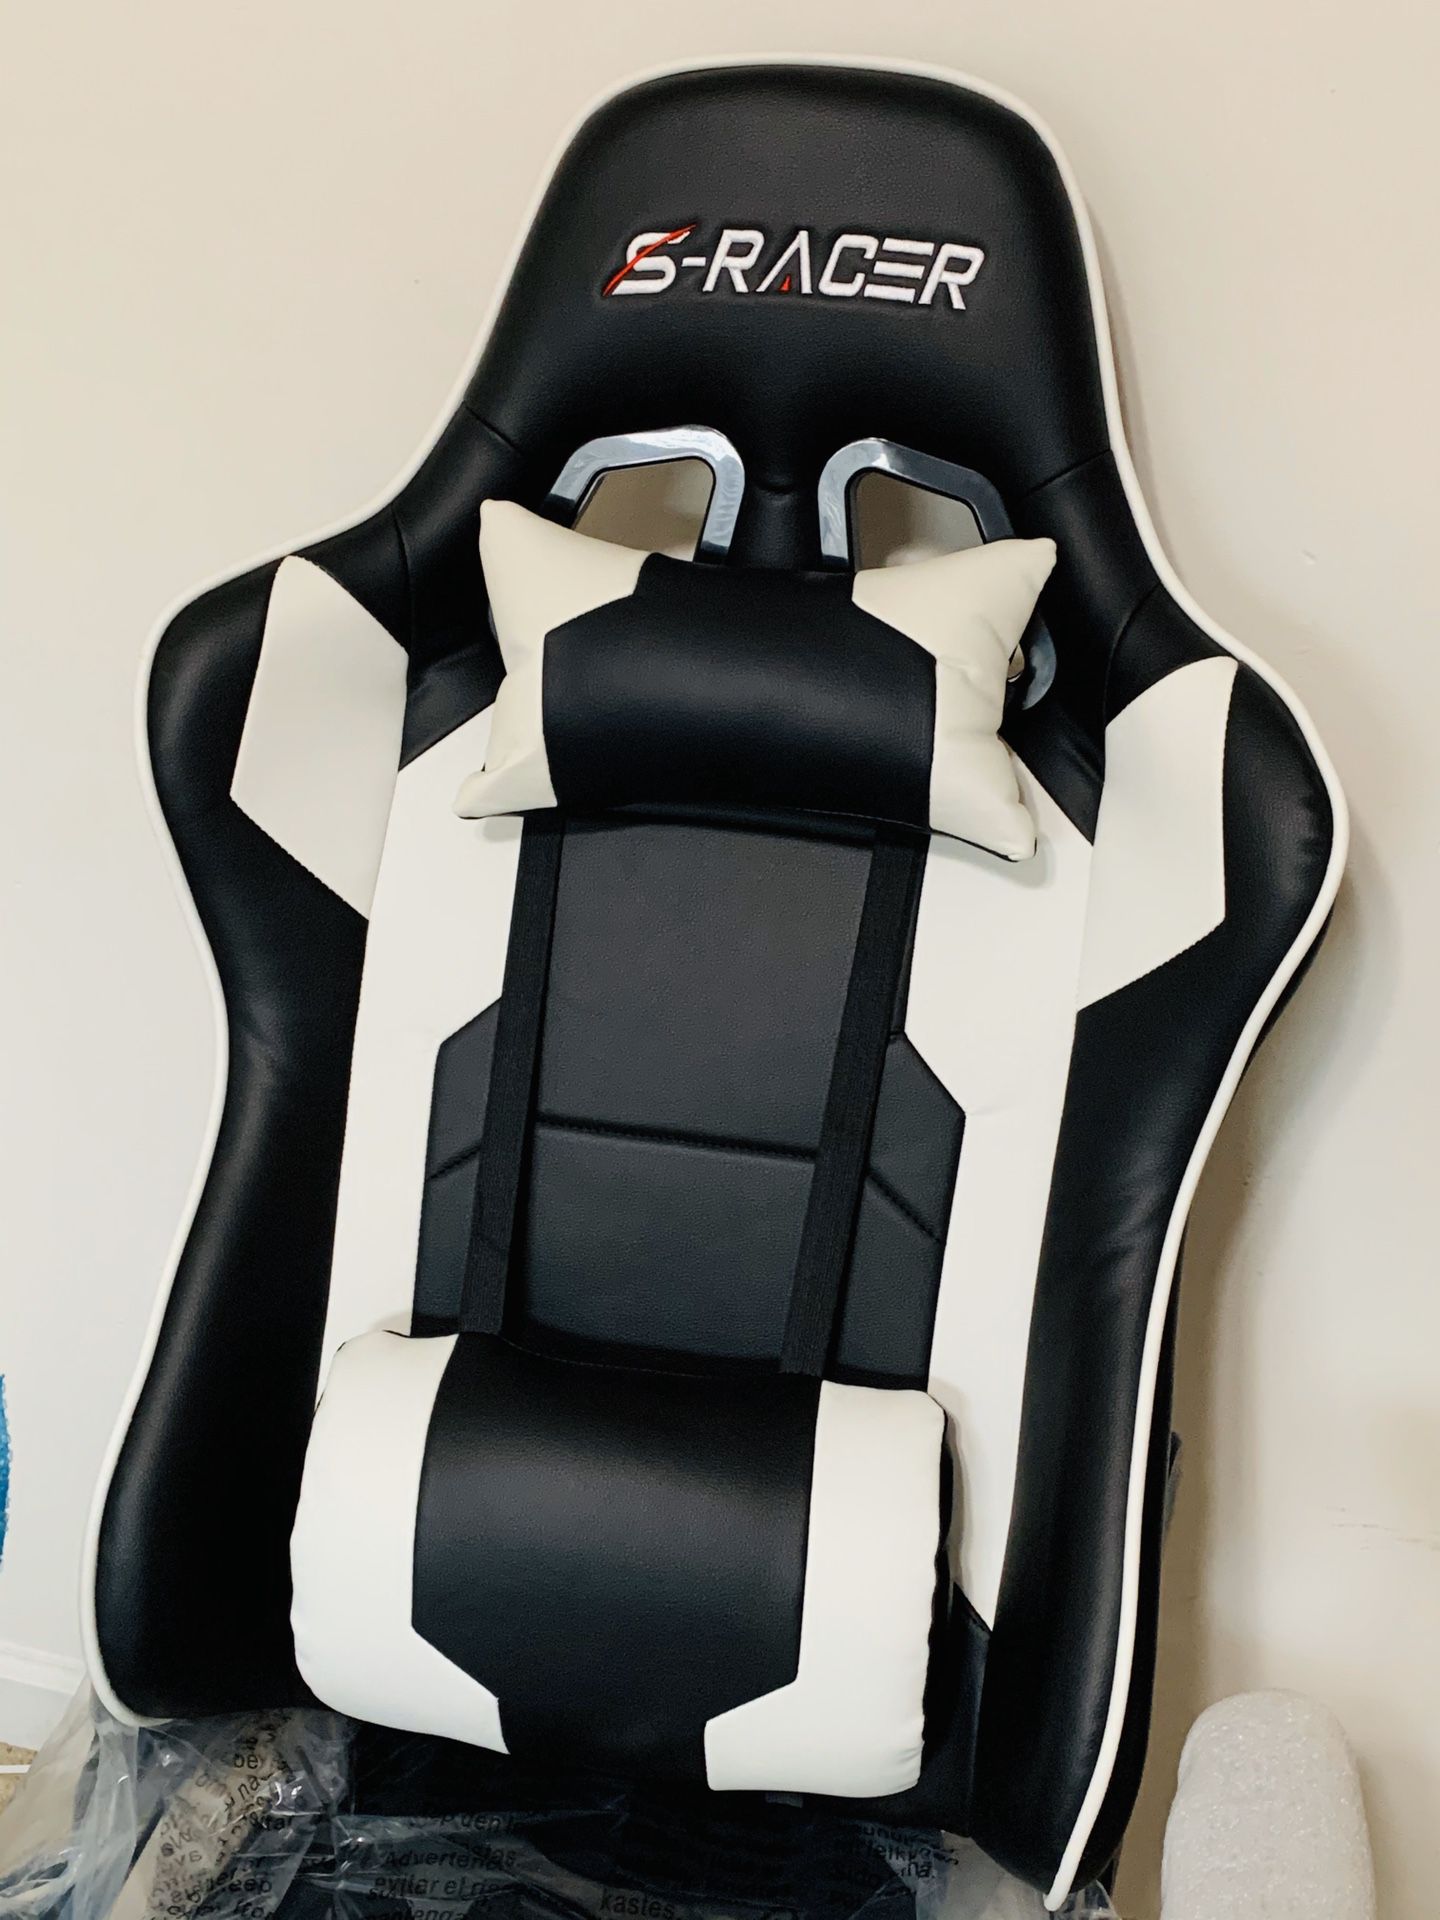 Gaming Computer Chairs for sale ! (NEW)